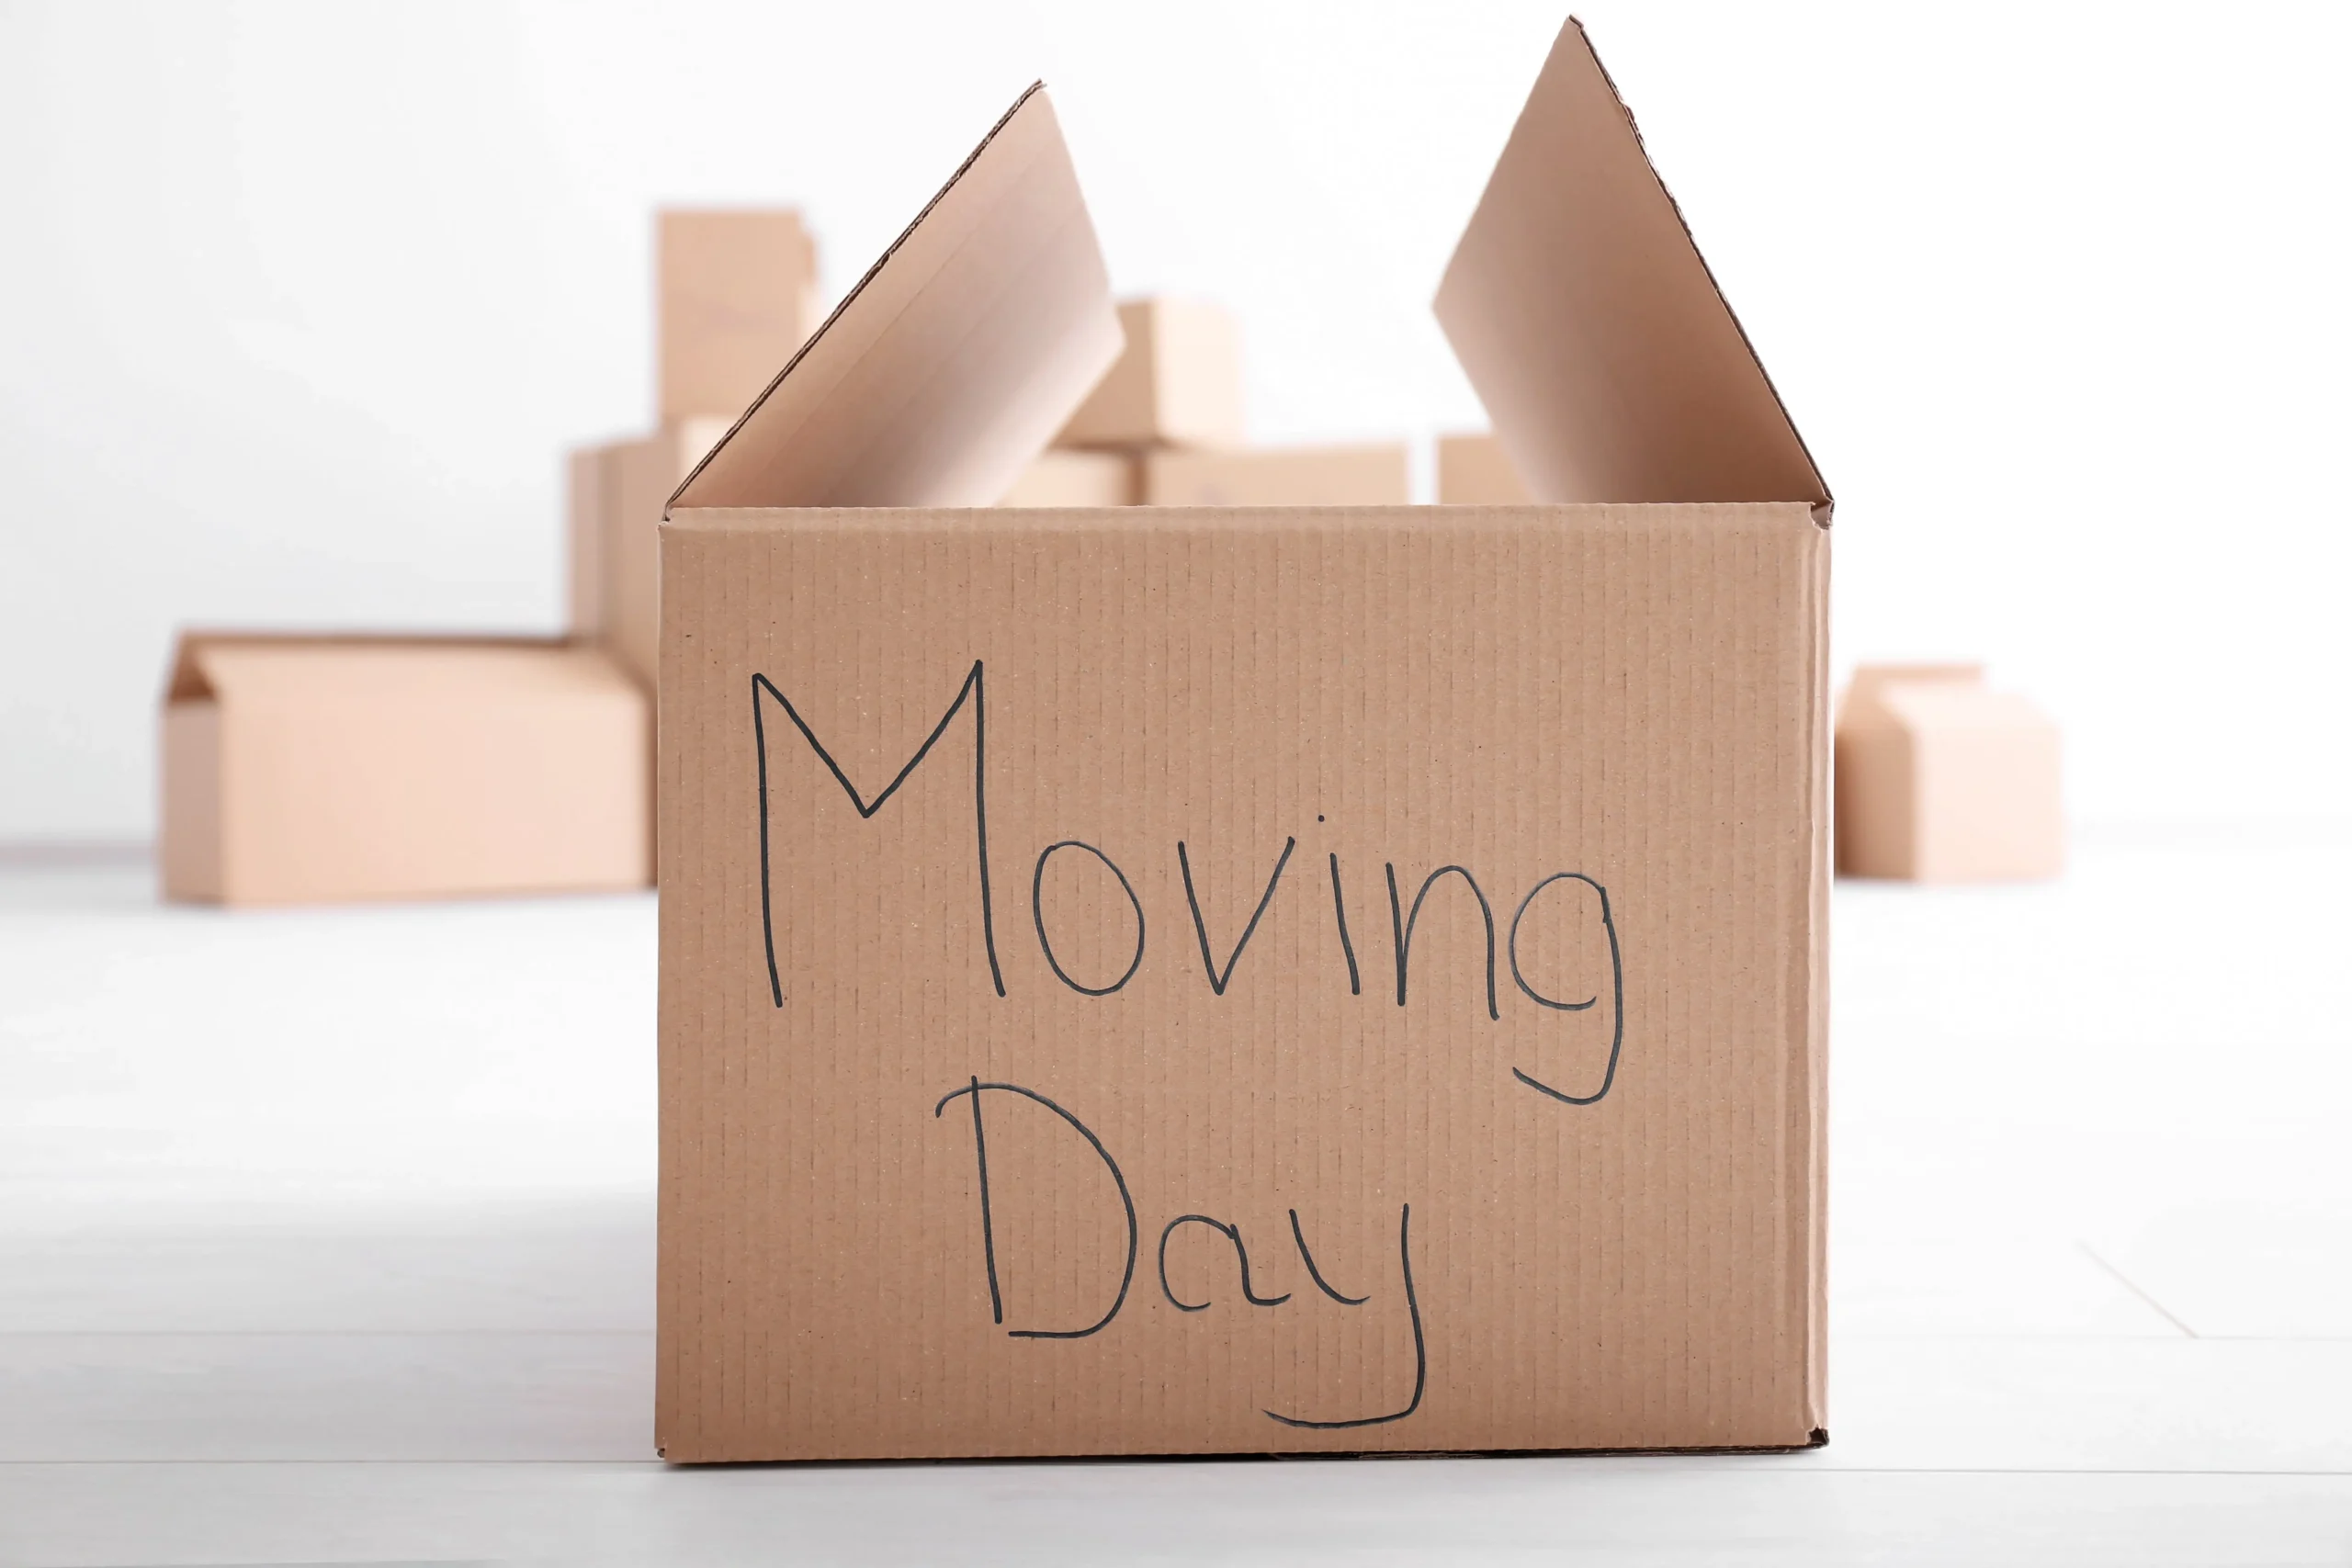 Moving Day Worries? Removals Insurance Can Ease the Stress